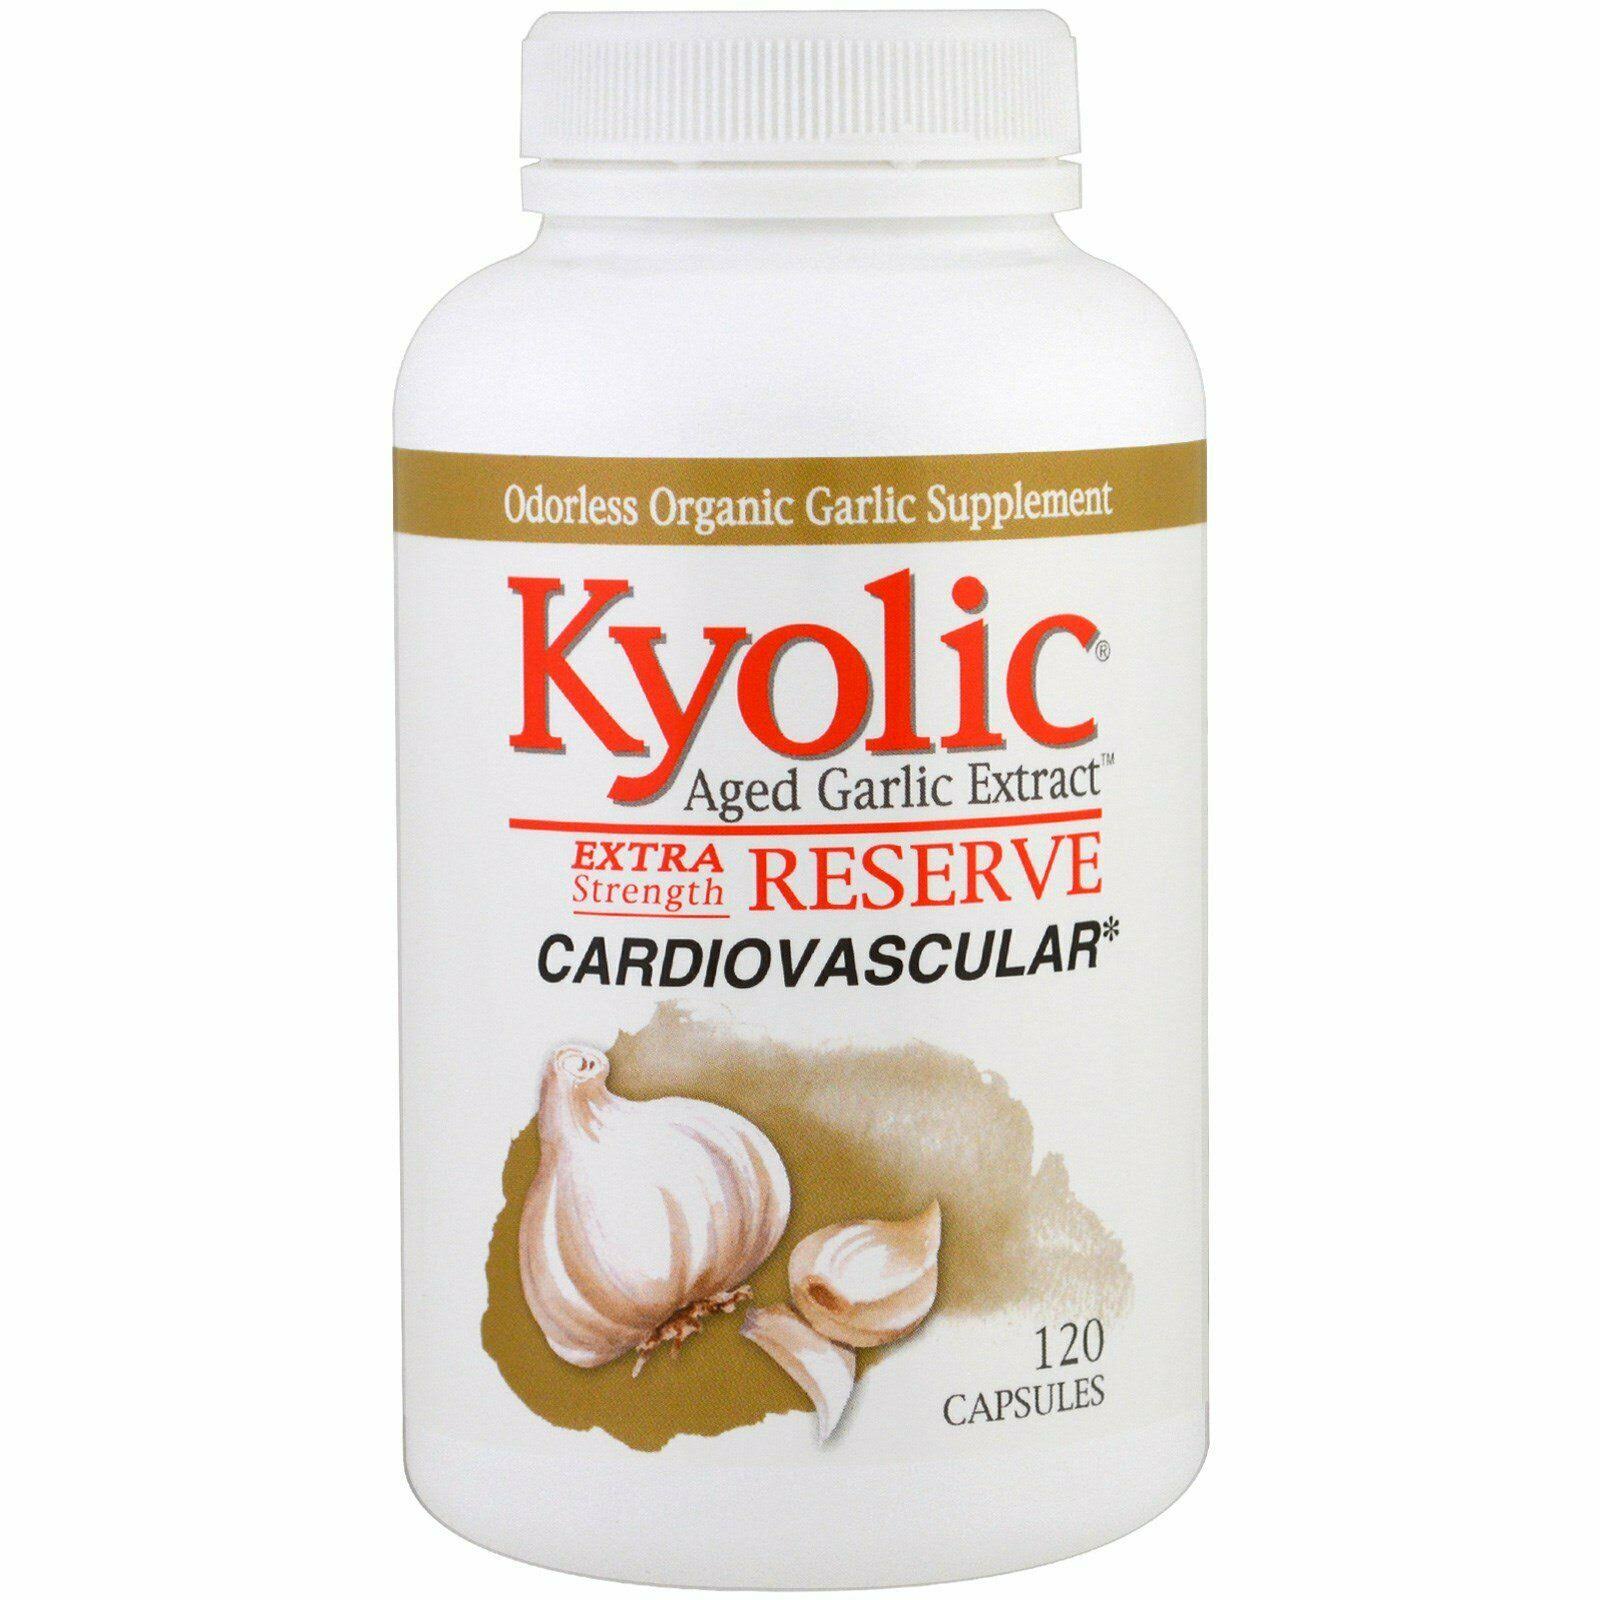 Kyolic Aged Garlic Extract Reserve Cardiovascular Supplement